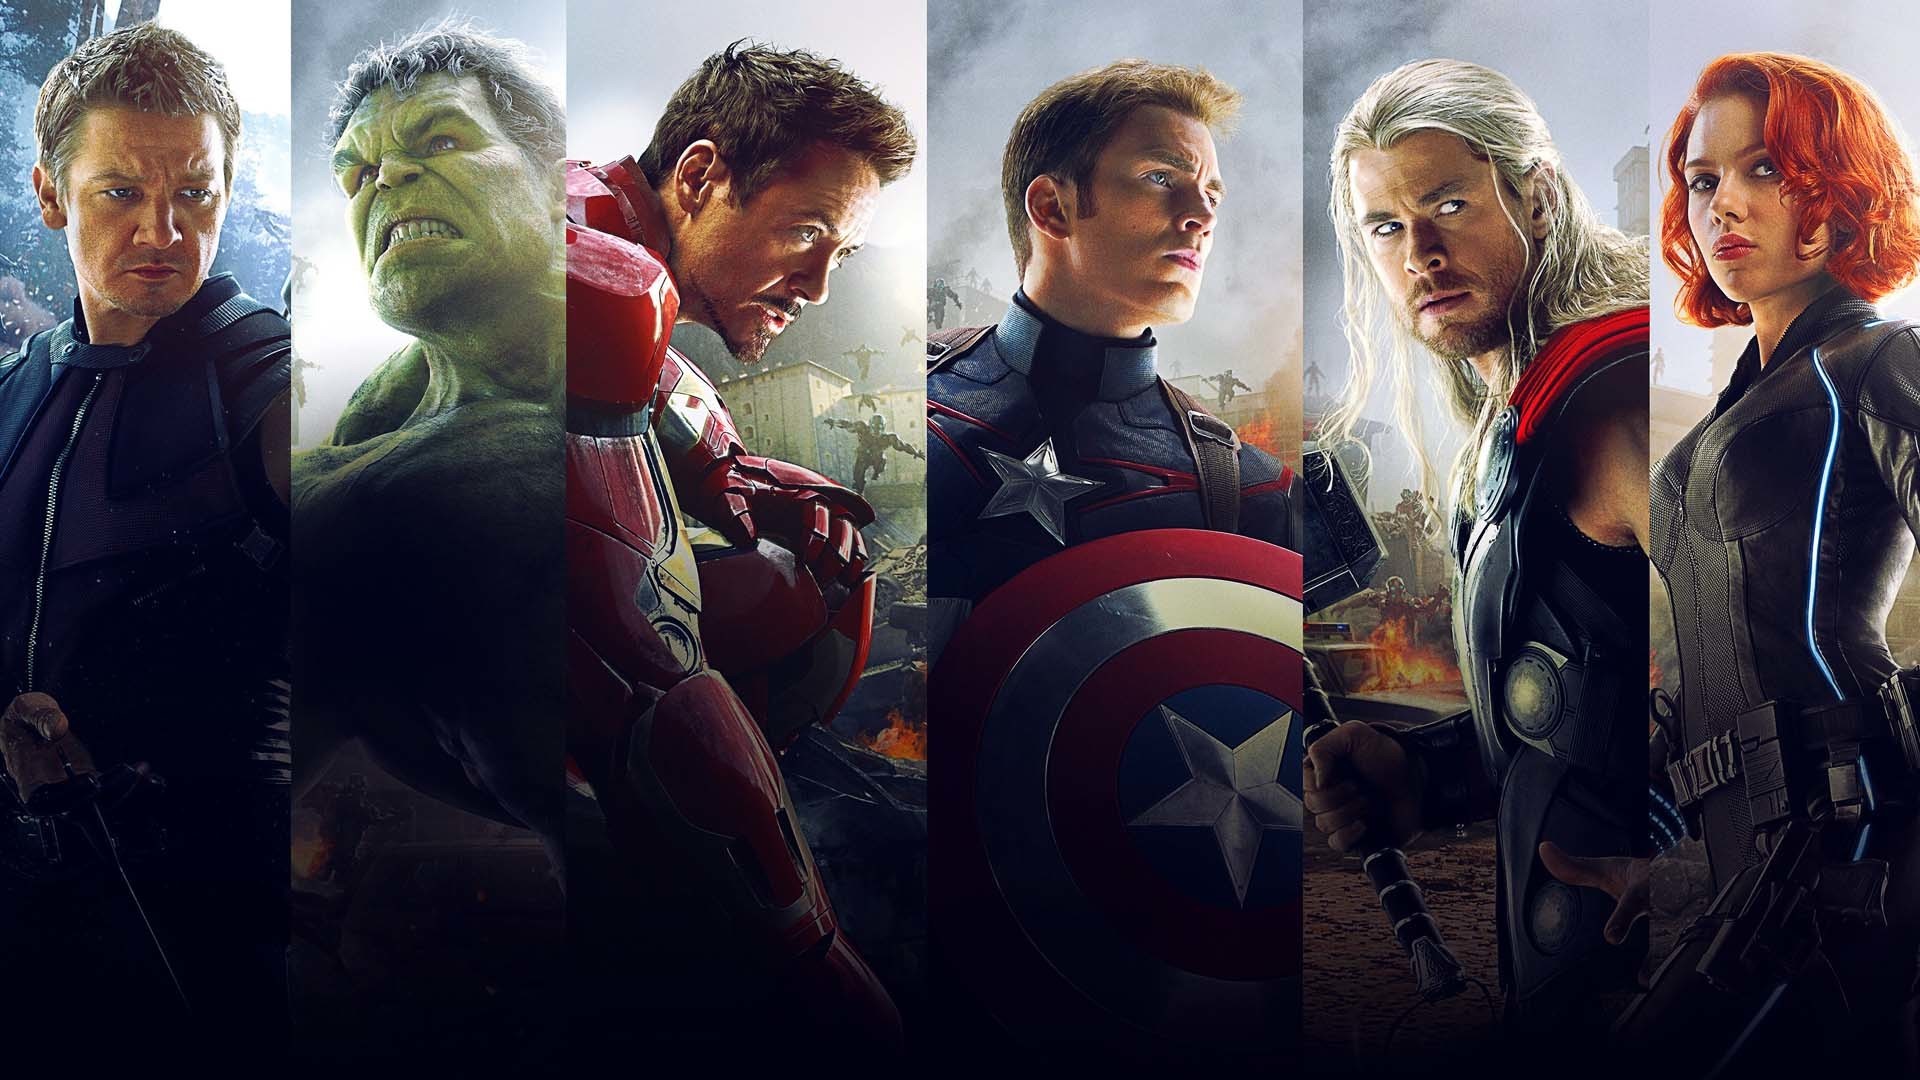 Movie Avengers: Age of Ultron HD Wallpaper | Background Image